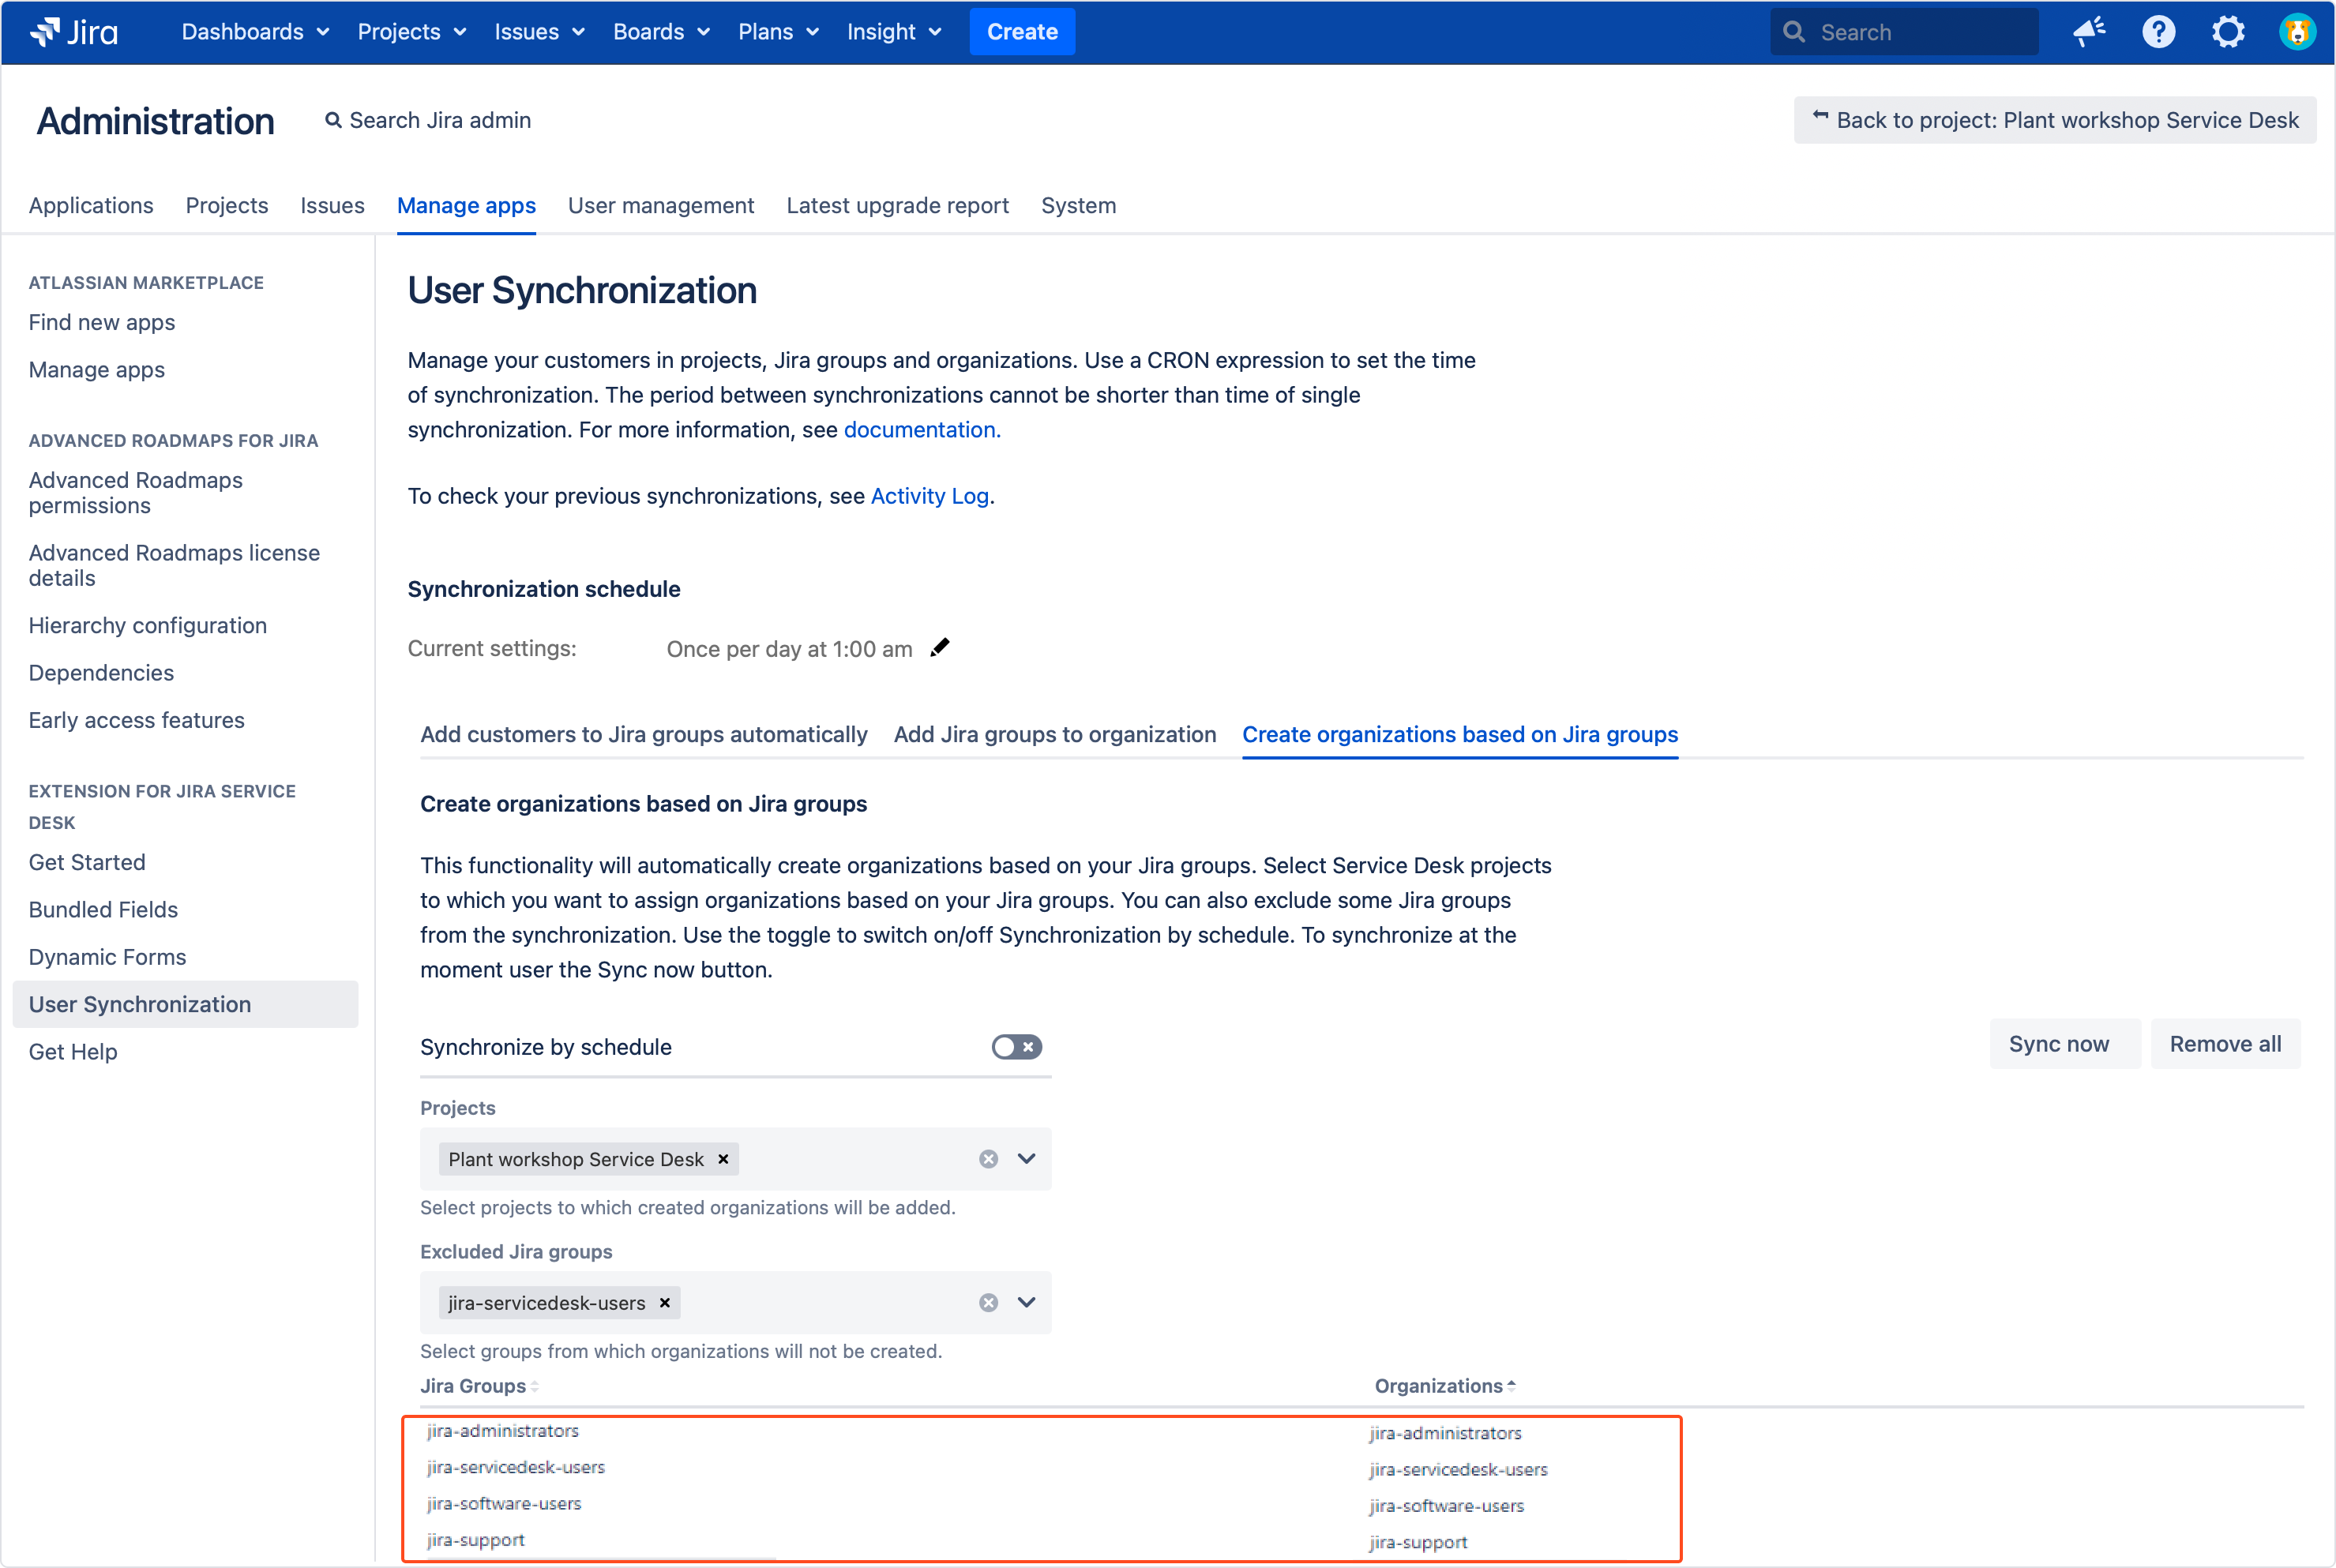 Creating Organizations based on Jira groups with Extension for Jira Service Management by adding a configuration